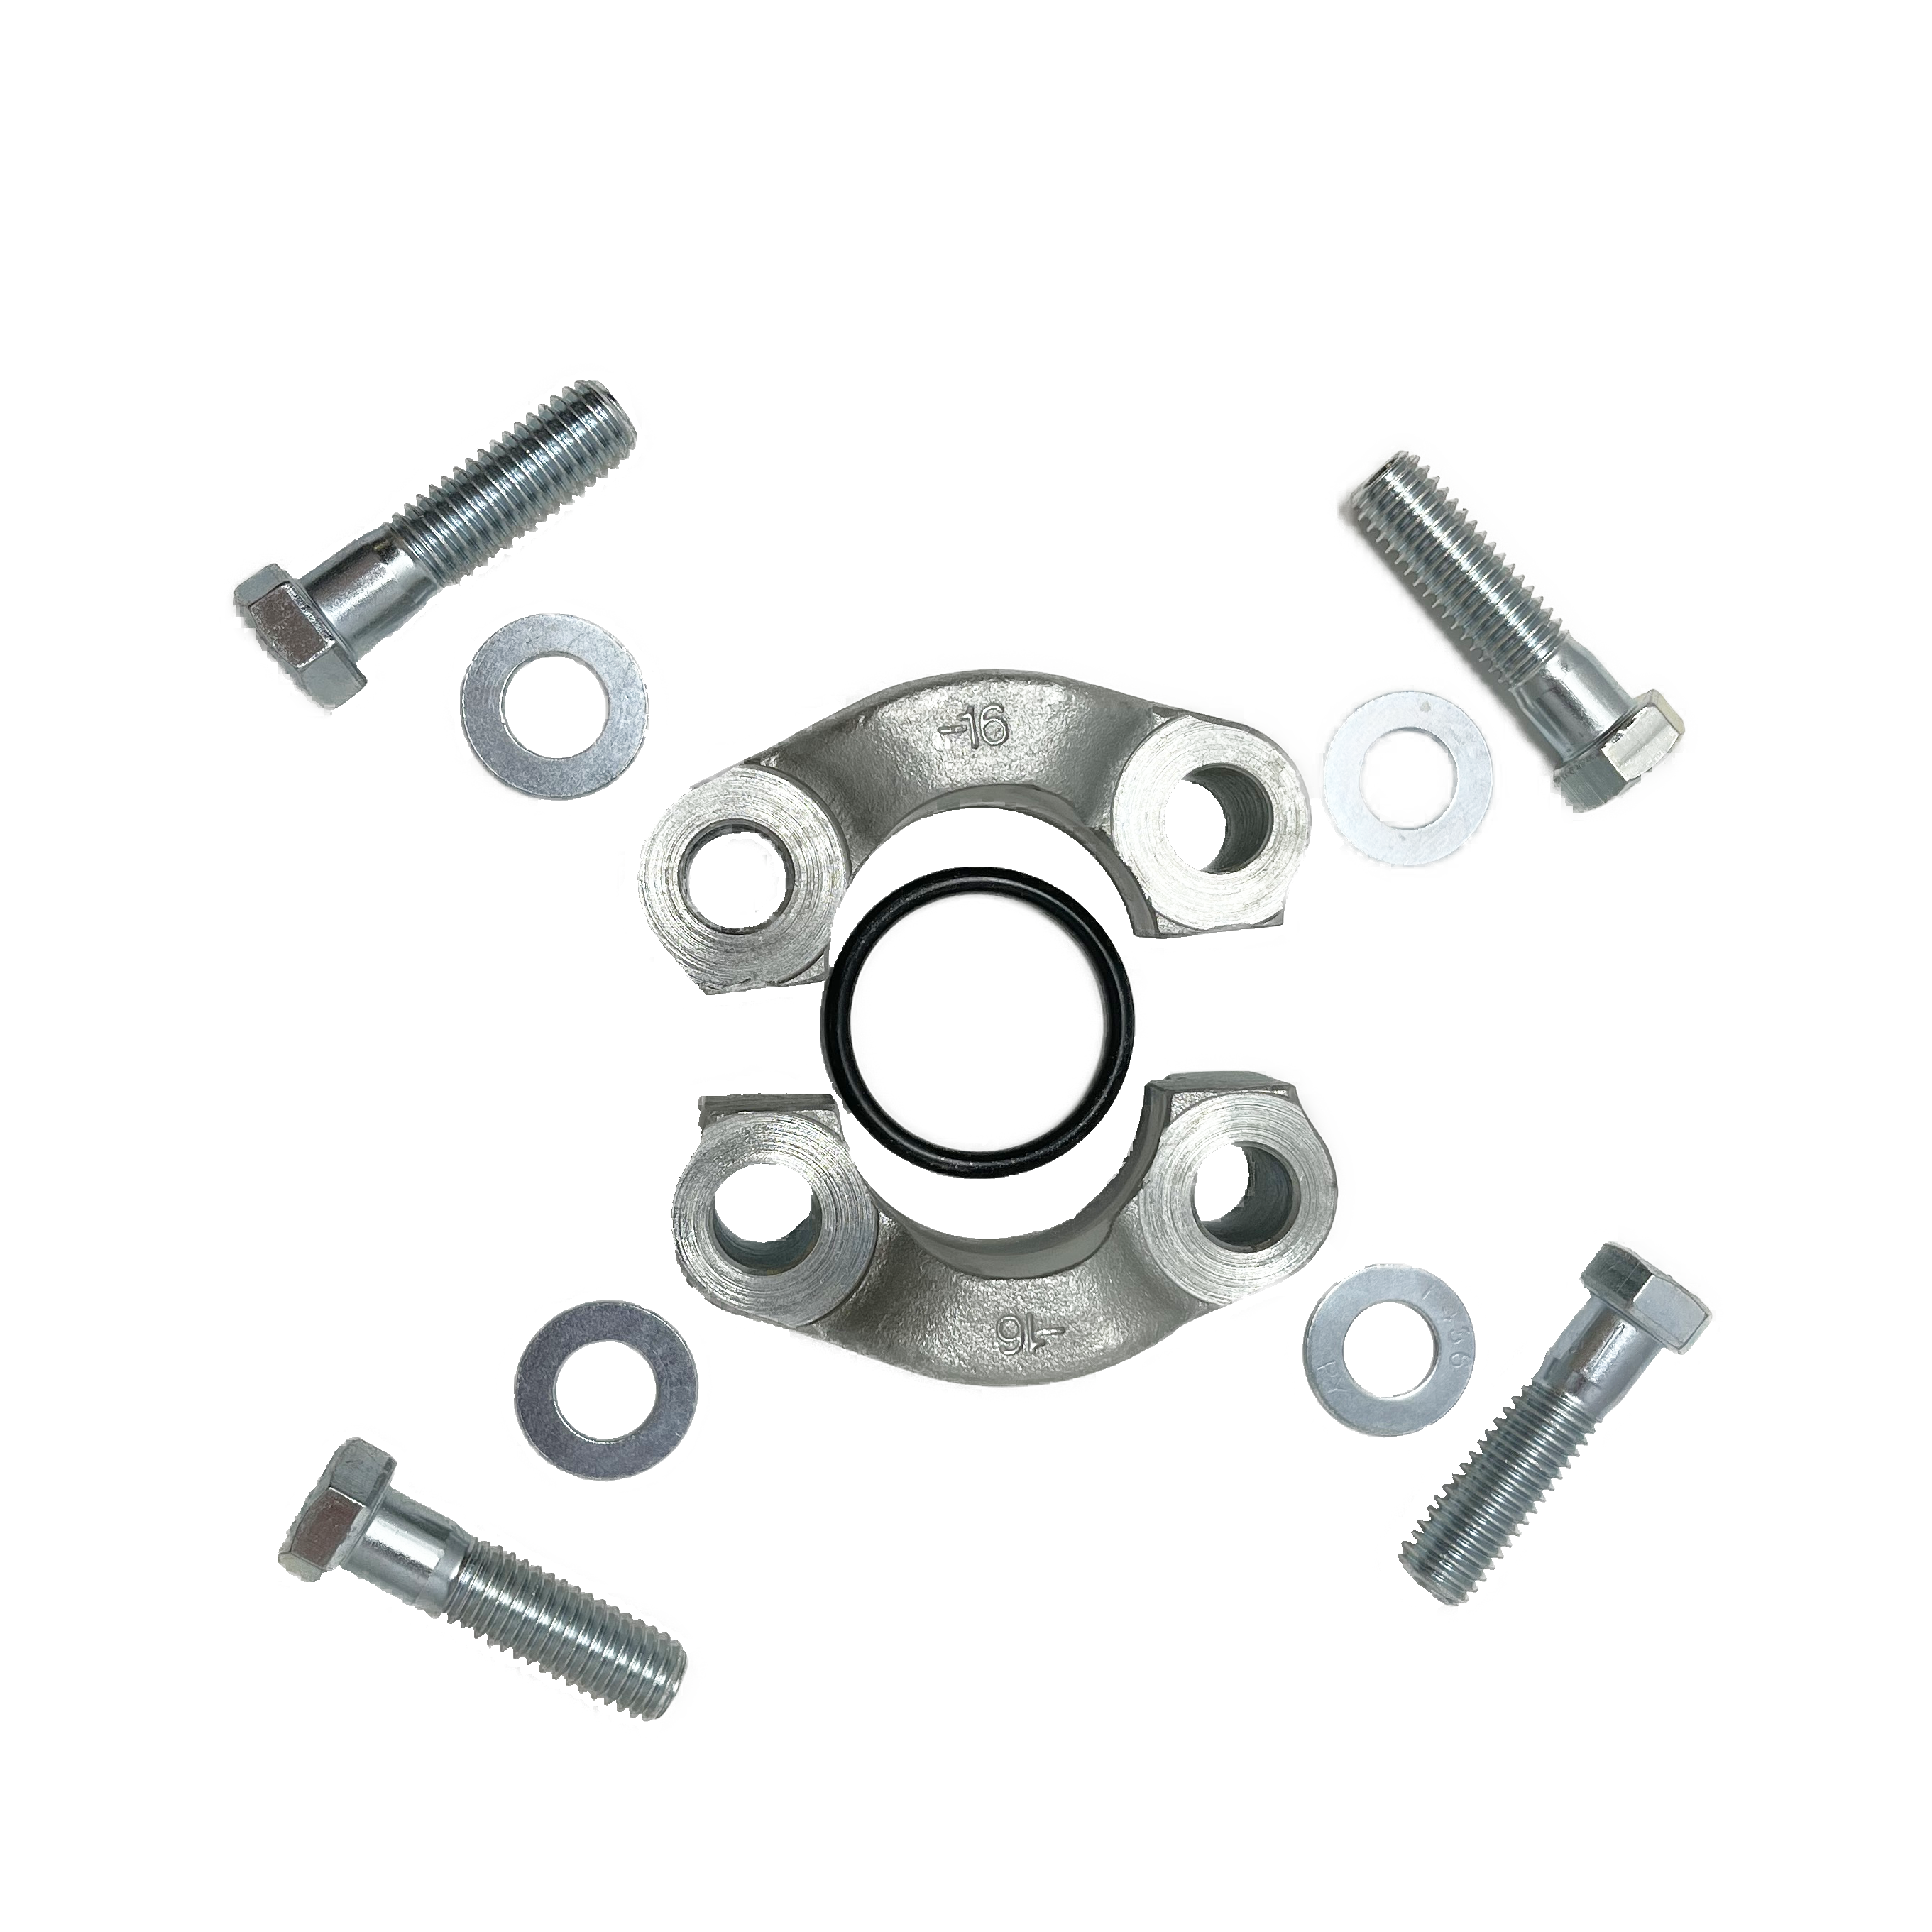 16SFXO : AFP Split Flange Kit, Steel, 1" Code 62, 6000psi, Includes two (2) halves, four (4) bolts, four (4) washers, and one (1) O-Ring